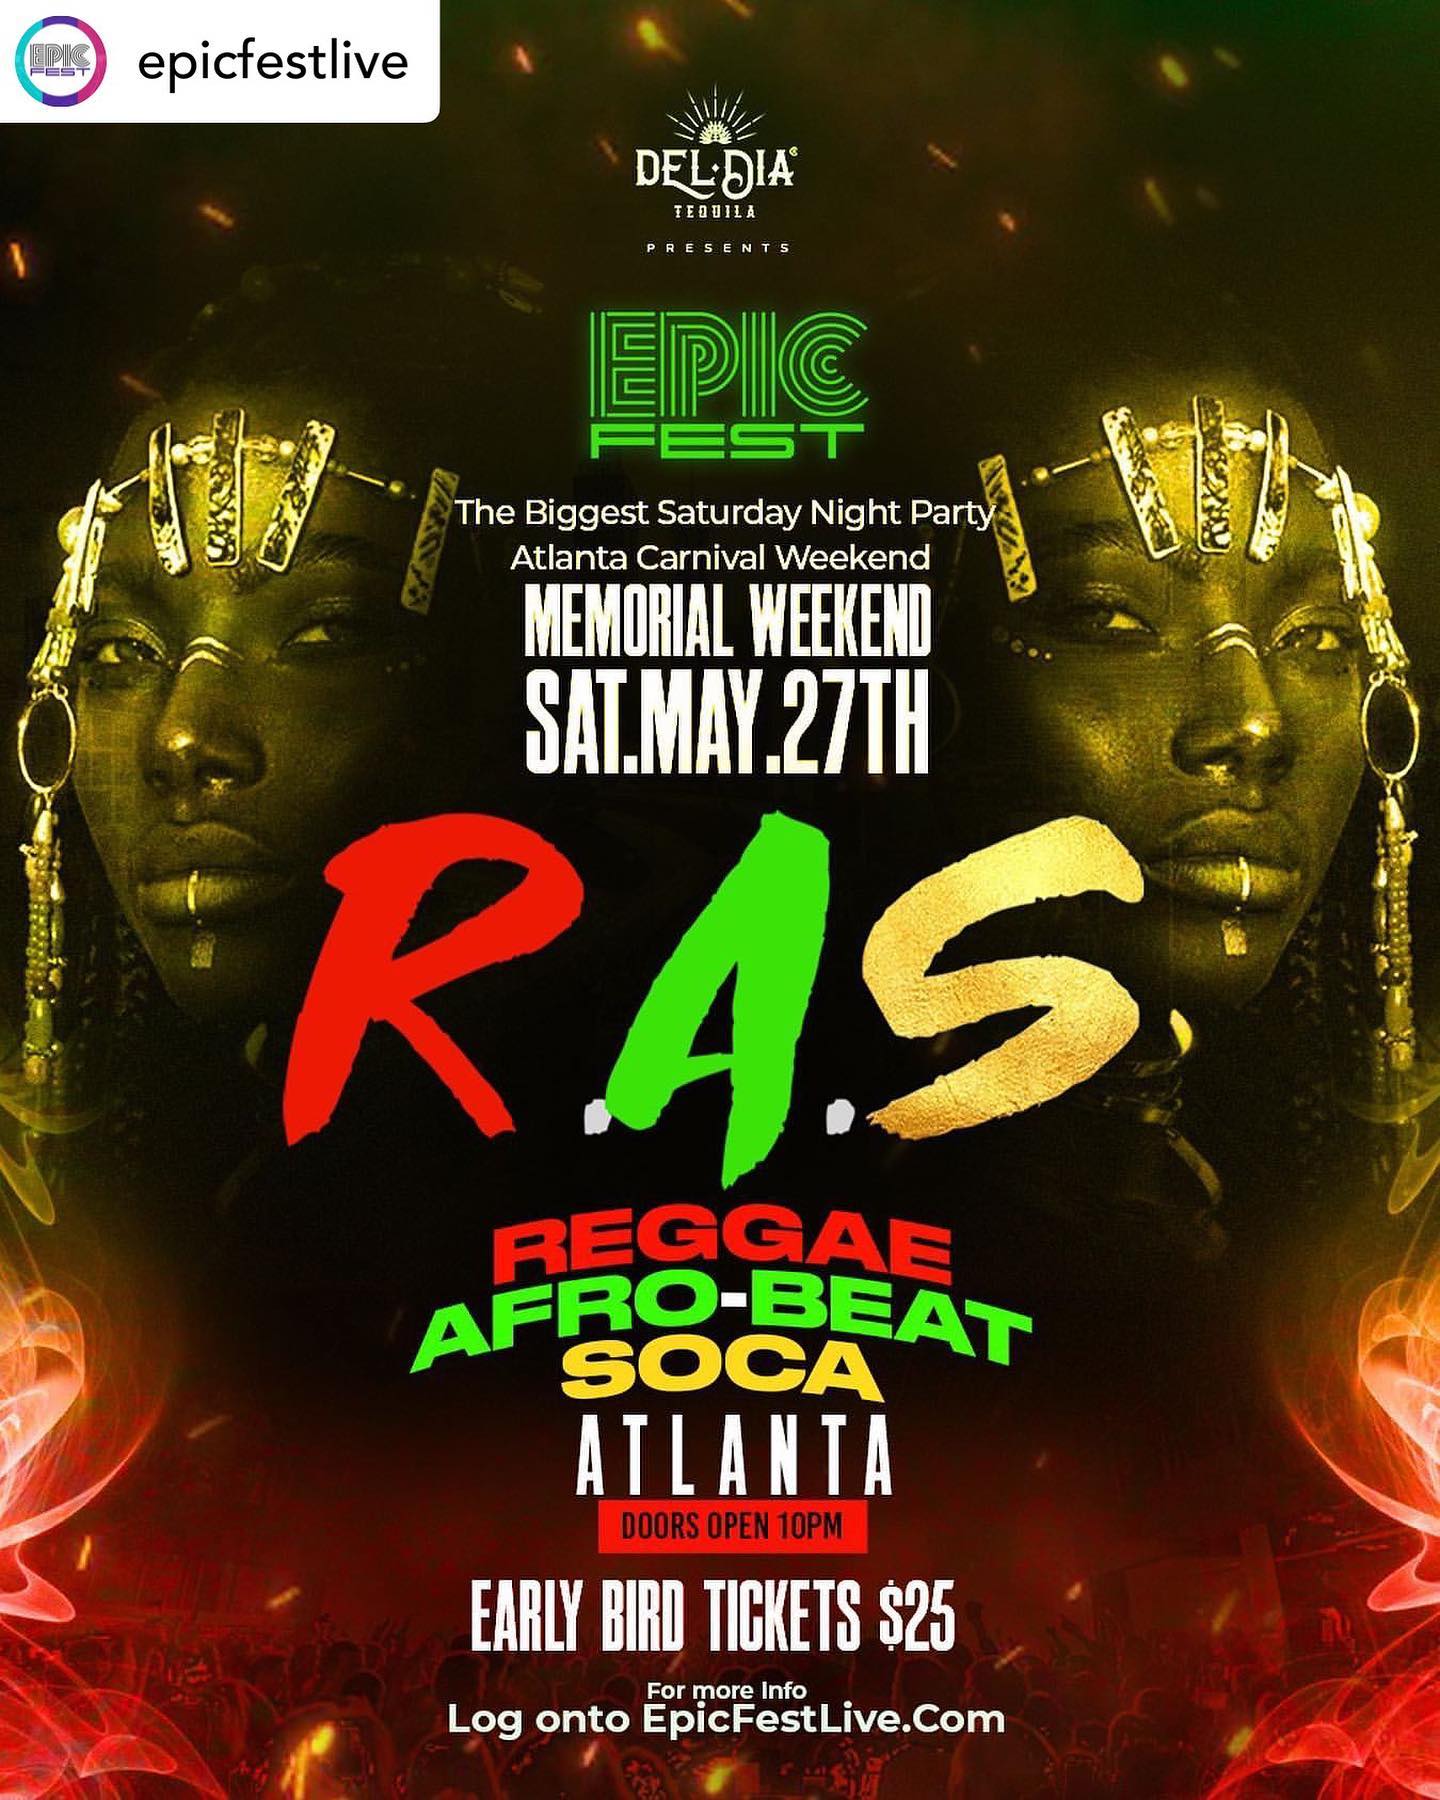 🚦

MEMORIAL WEEKEND | SATURDAY MAY 27TH.

Get Ready for the biggest AfroCarib atlanta Carnival Weekend 

🚦R.A.S🚦

100% 
REGGAE . AFROBEATS . SOCA

VIBES by 
KEVIN CROWN 
DJ PRIVATE RYAN
COPPER ASH 
NEGUS BRITISH 
RIGGO SUAVE 

10pm-4am 

Early bird tickets $25 

For more info log onto 
EPICFESTLIVE.COM